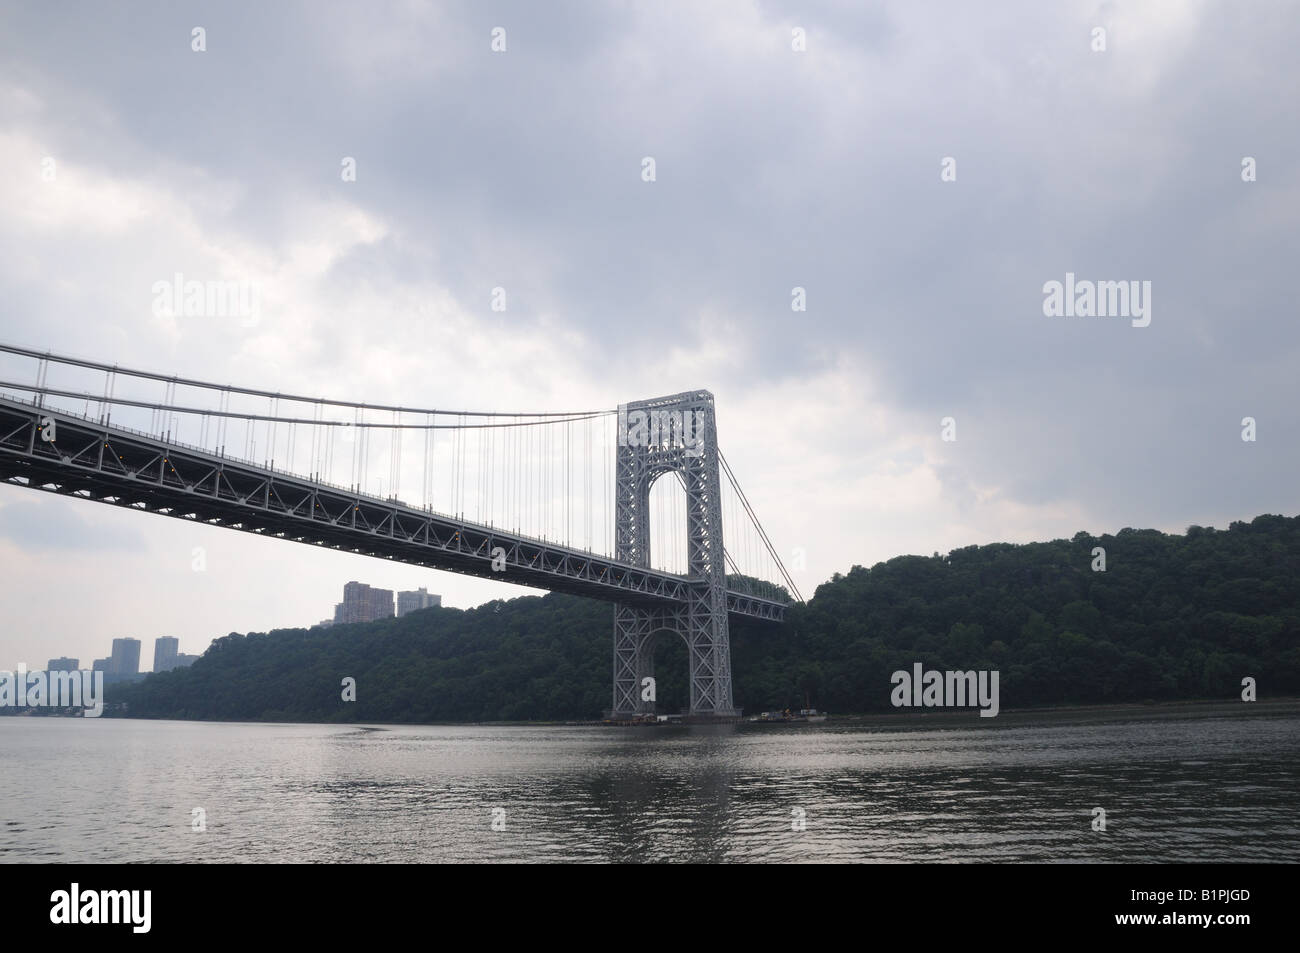 The George Washington Bridge connects New Jersey and New York City. This is the New Jersey side of the bridge Stock Photo